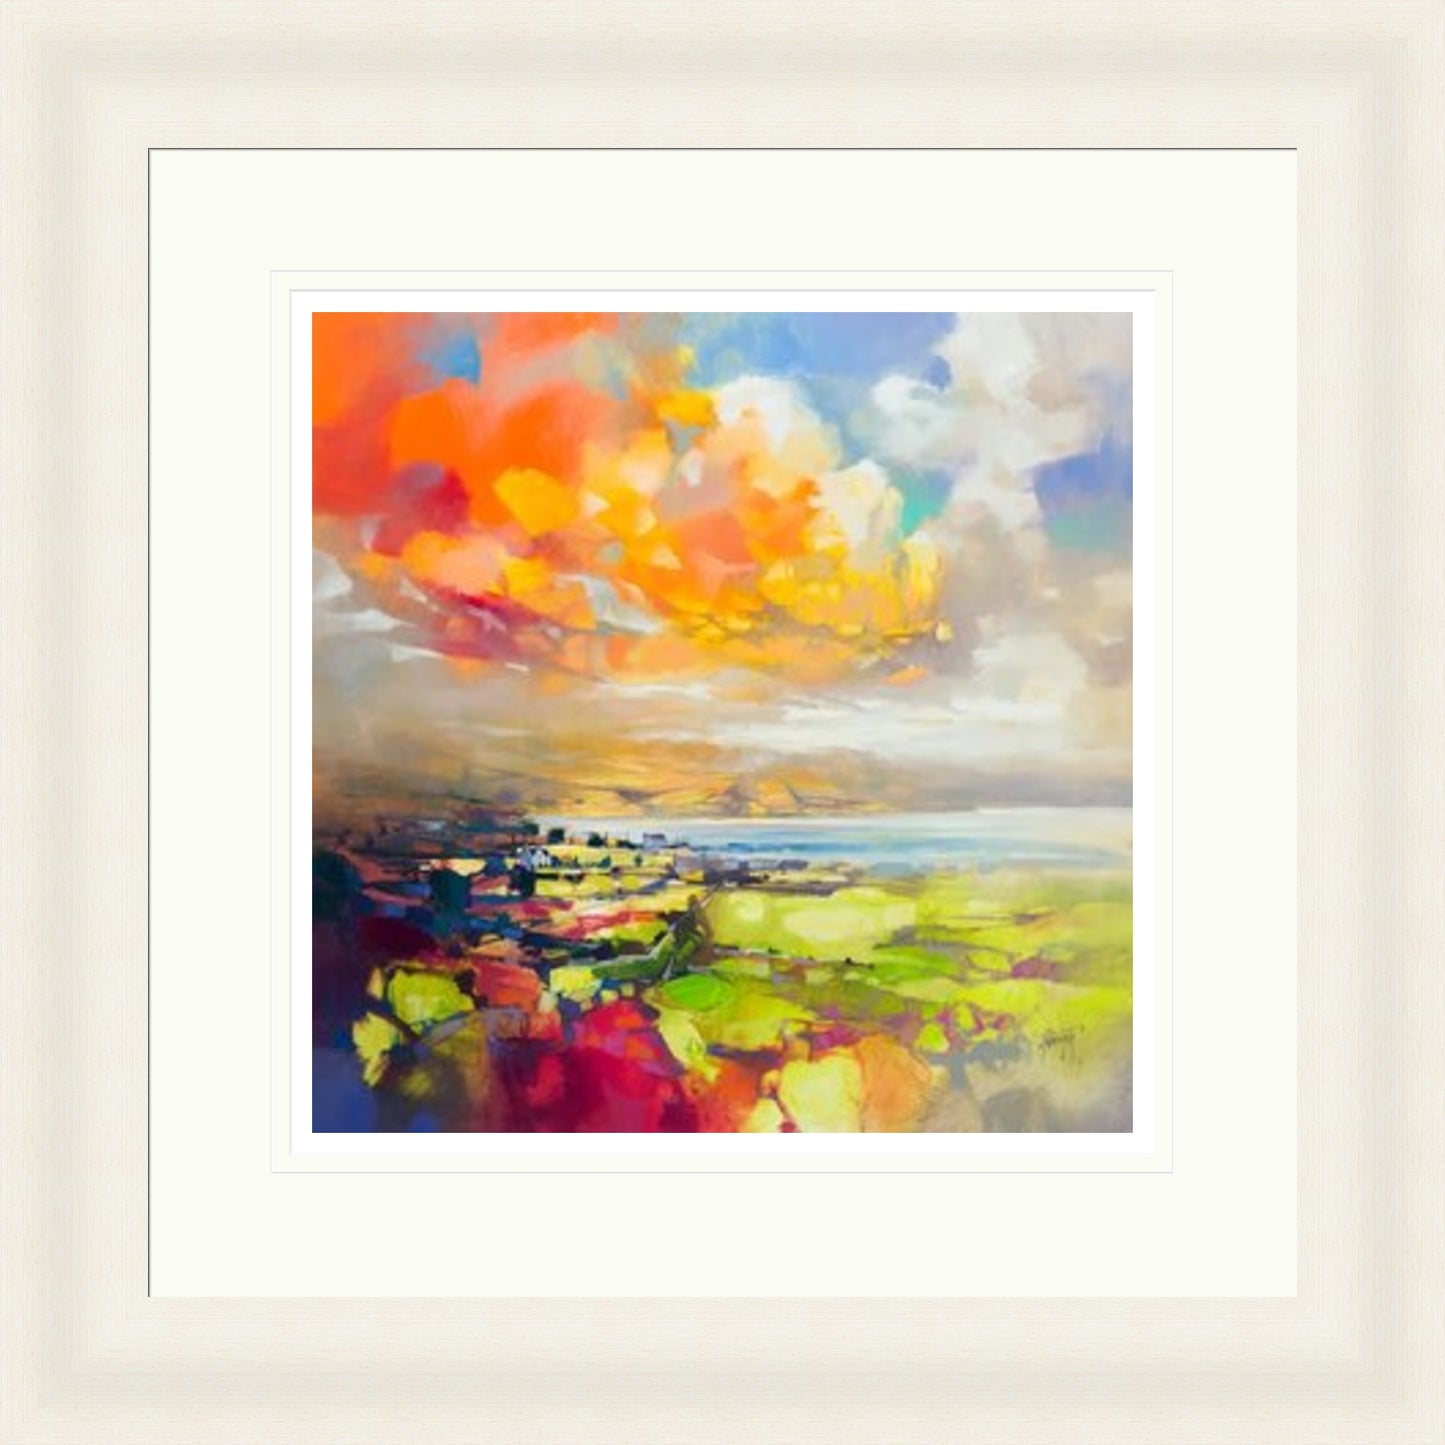 Skye Shadows (Signed & Numbered Limited Edition) by Scott Naismith